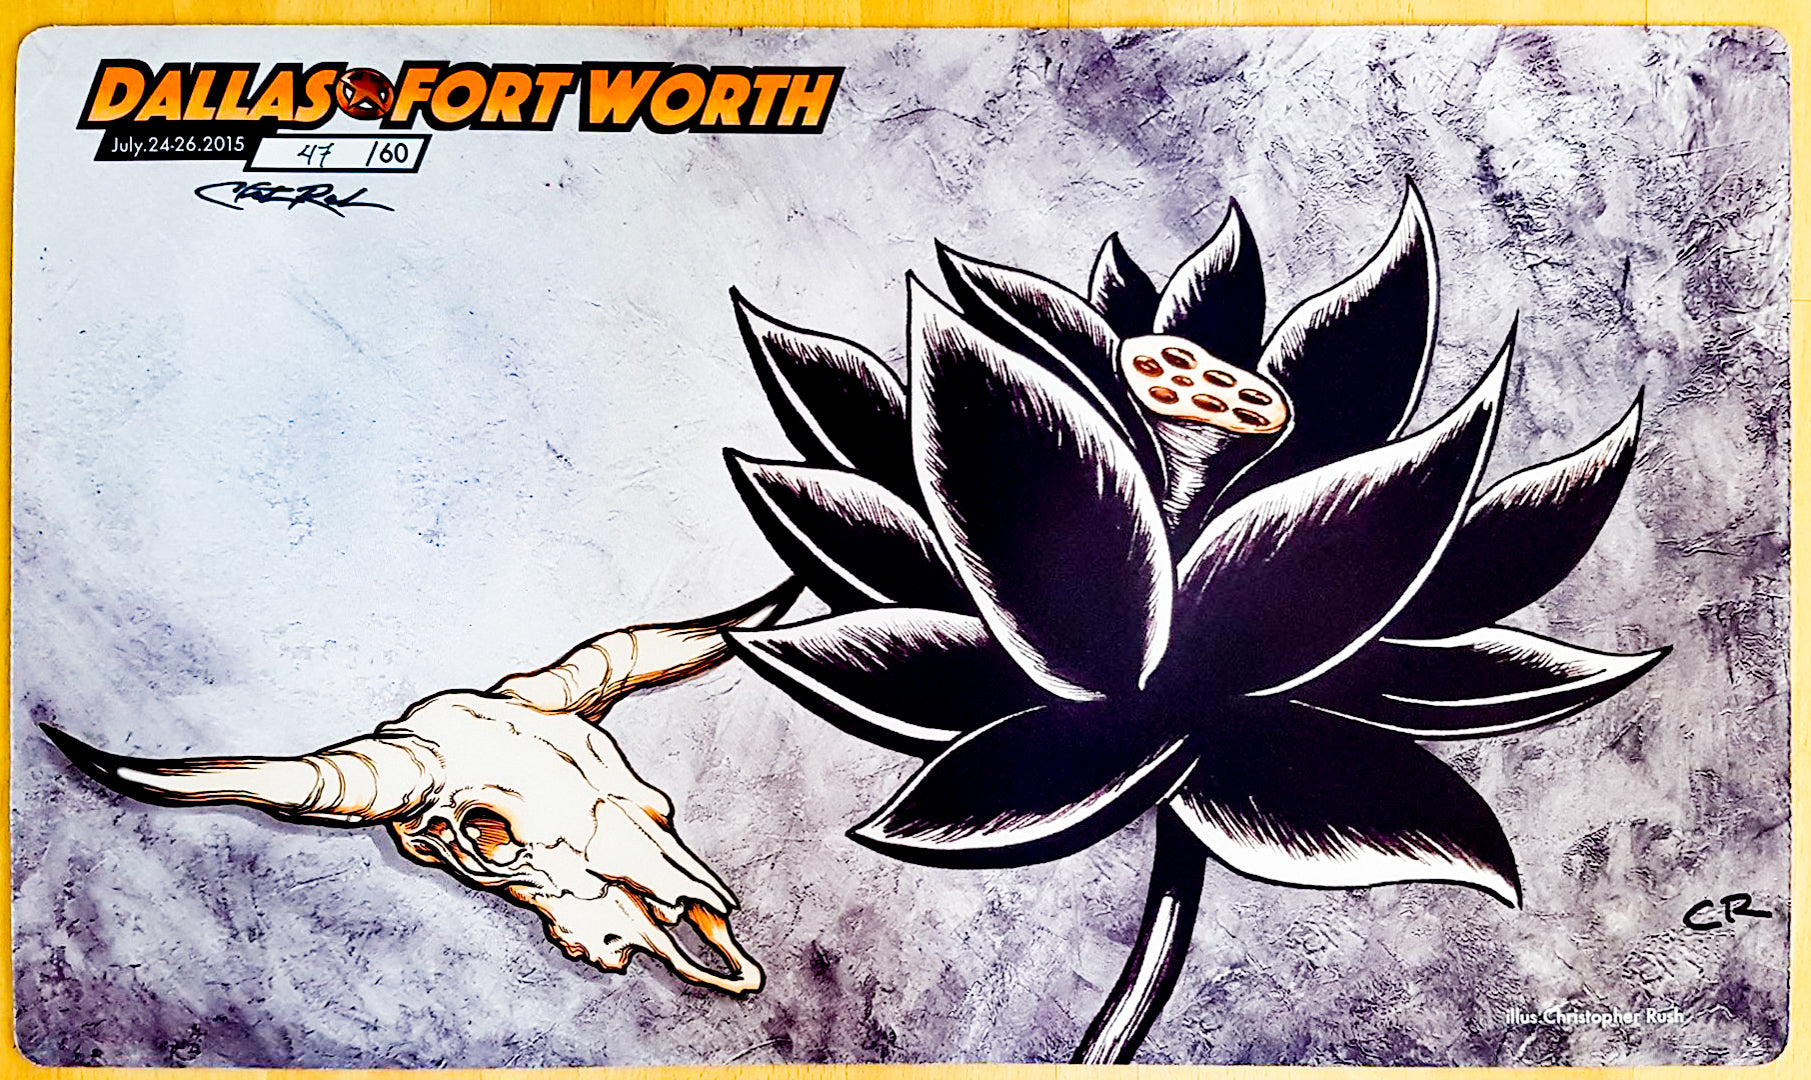 Black Lotus & Bull's Skull - Christopher Rush - Grand Prix Dallas-Fort Worth 2015 - Signed by the Artist - Limited Edition - MTG Playmat